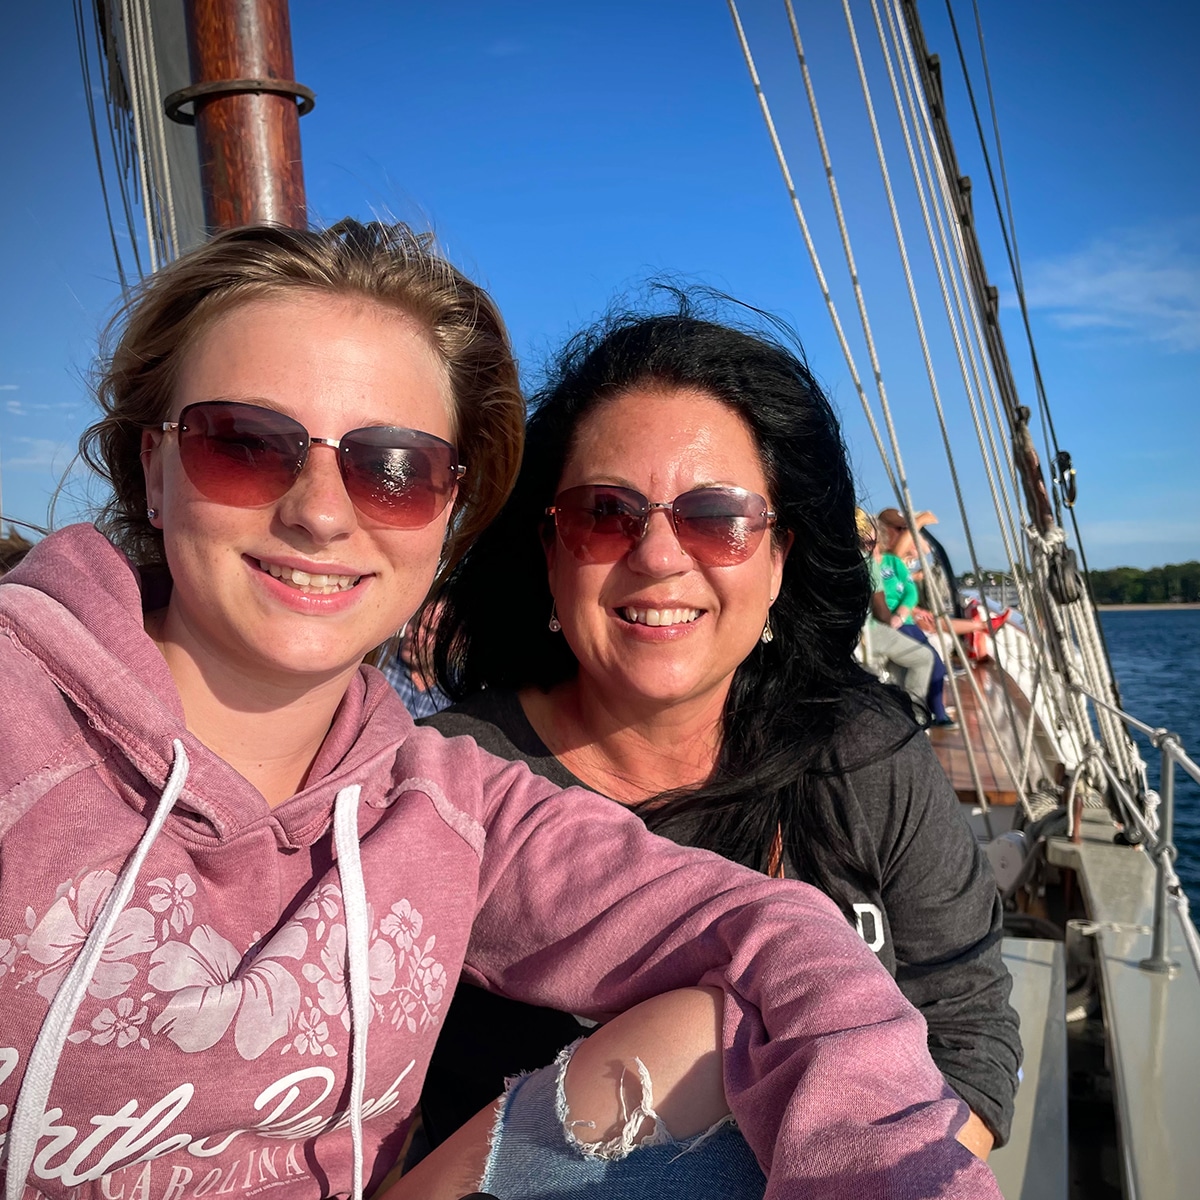 Myself and my niece aboard the Tall Ship Manitou sailing in Traverse Bay.